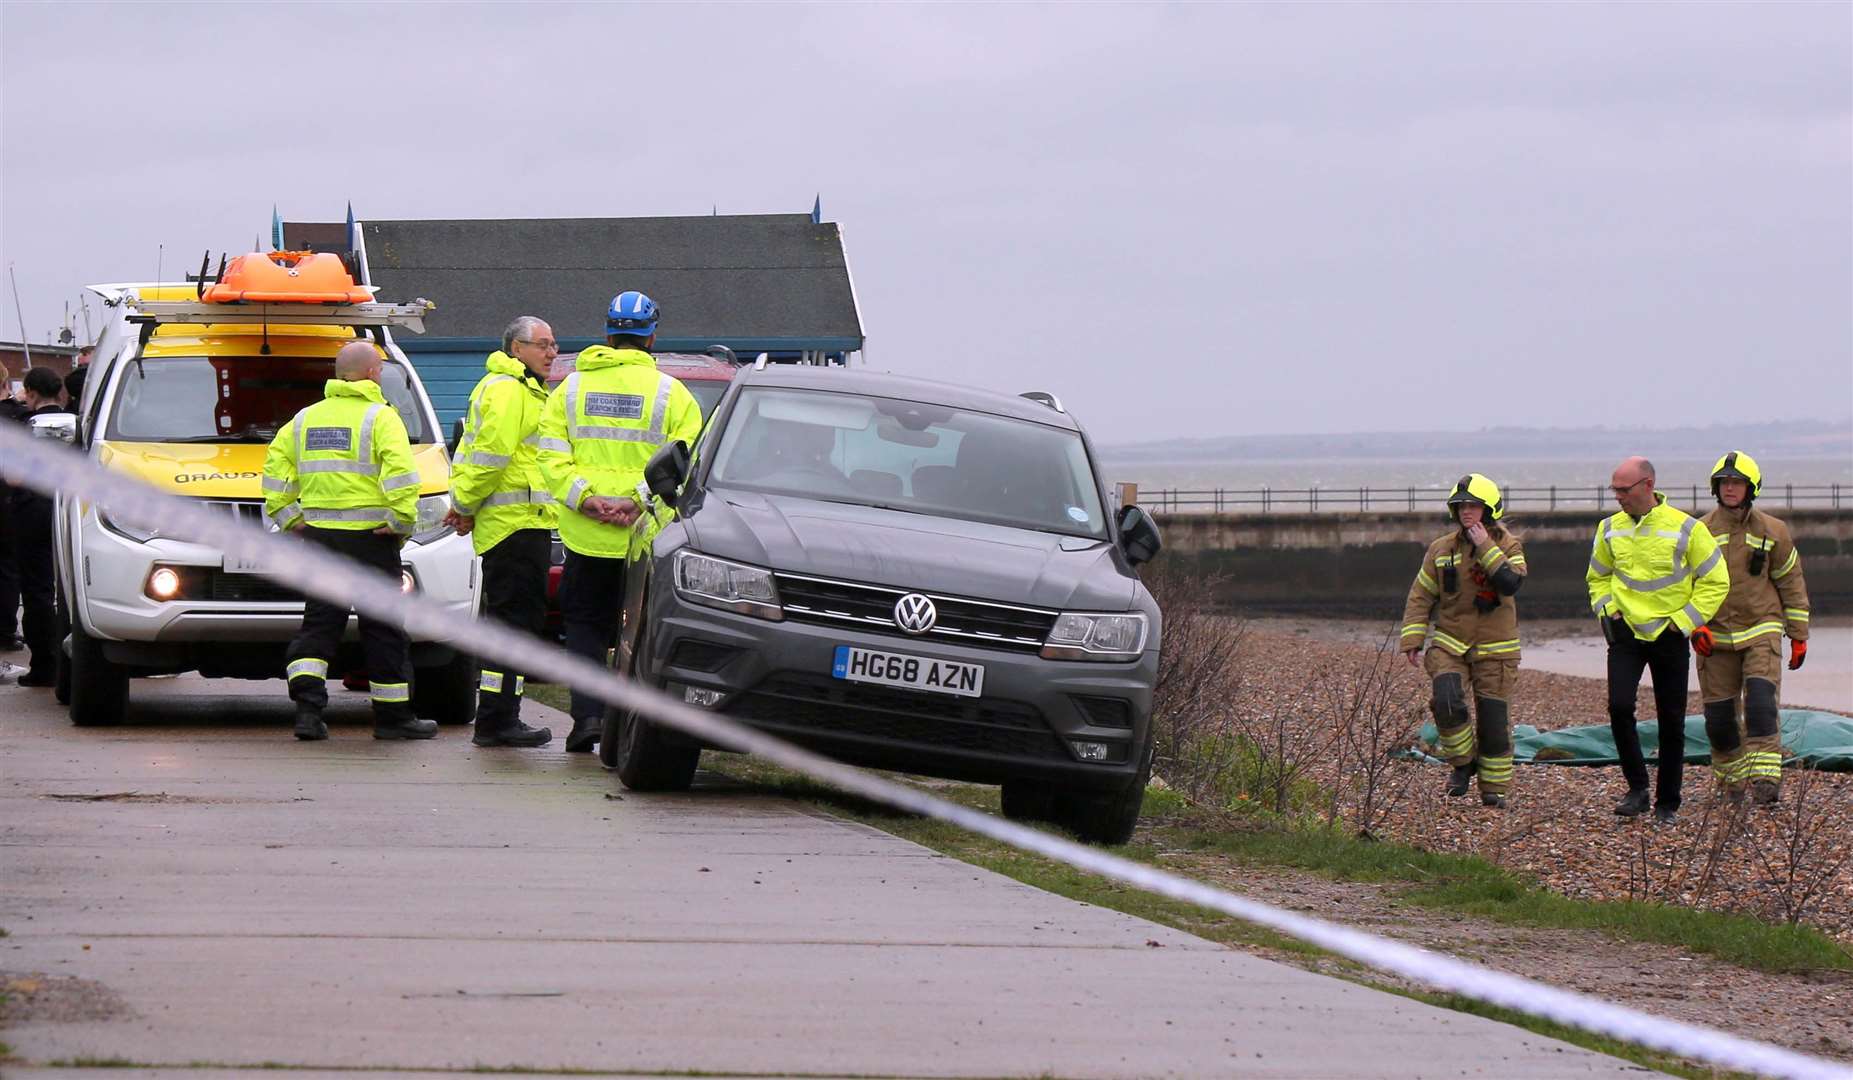 Emergency services at the scene in Herne Bay. Picture: UKNIP